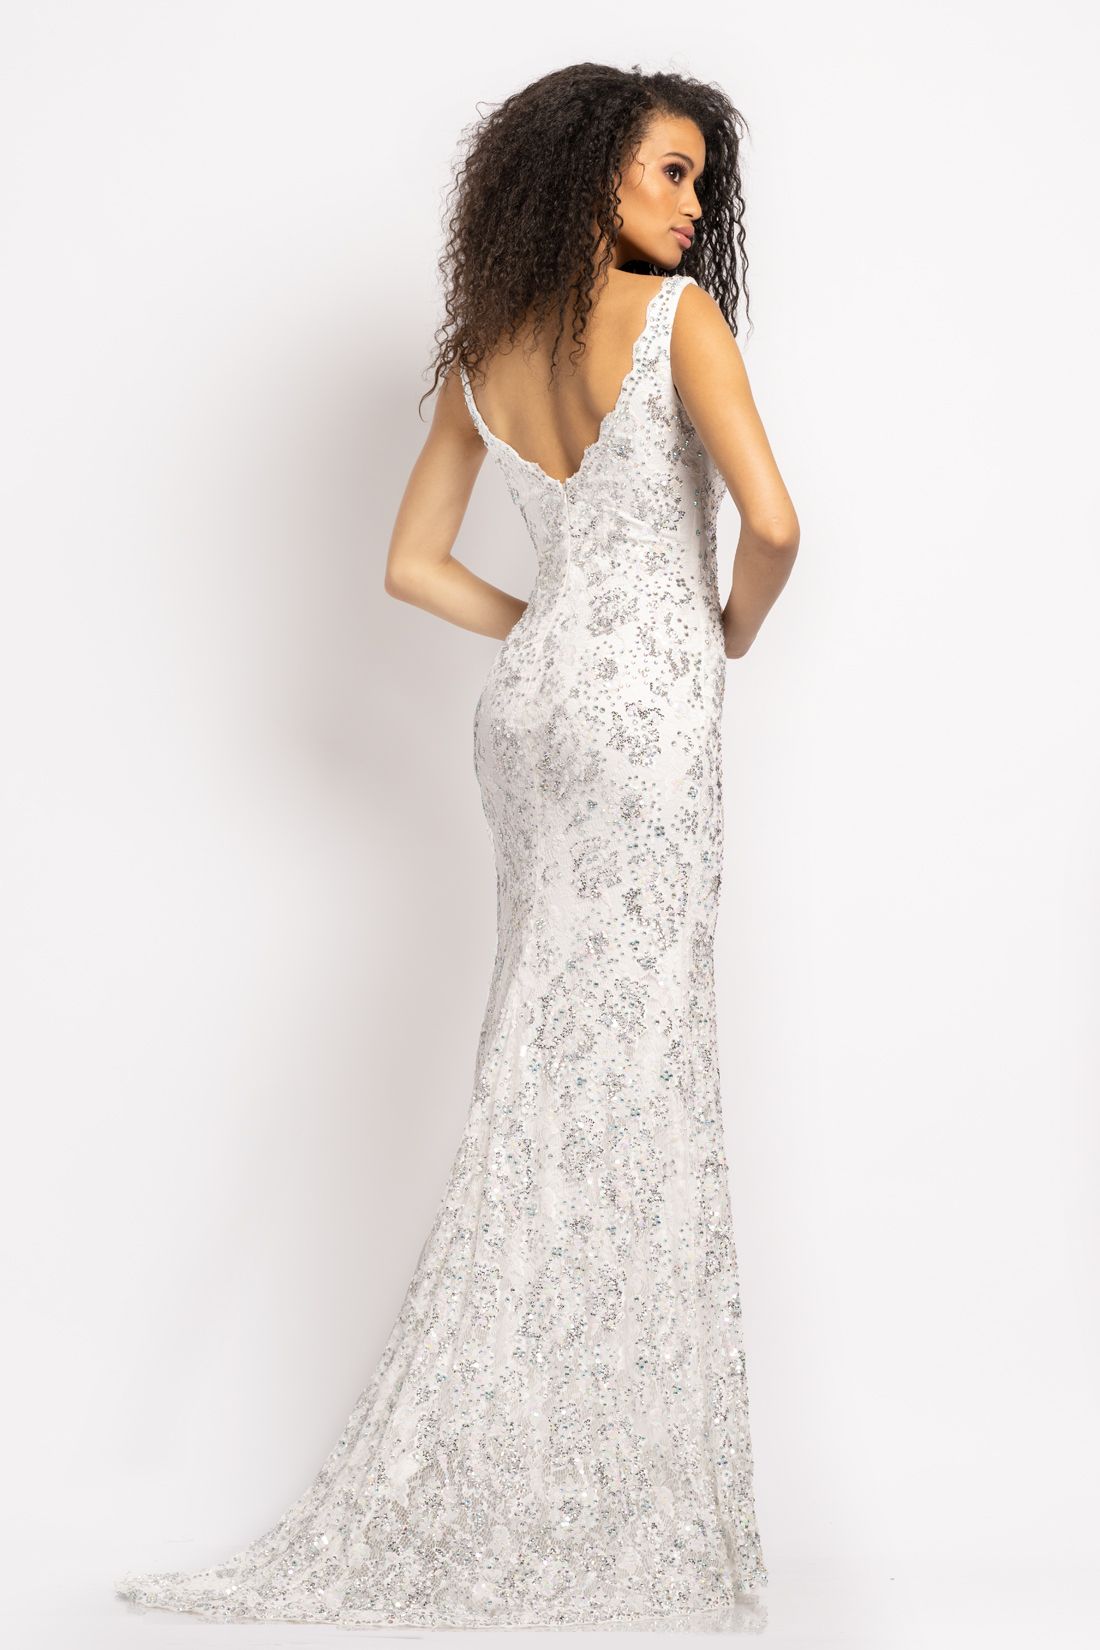 Johnathan Kayne 2181 Long White Lace Form Fitted Prom Pageant & Bridal Gown. This Stunning Evening Gown Features a scallop lace edge along the plunging neckline, slit and hem. Embellished with sequins, Crystal Rhinestones & Beading. This gown is a stunning as they come!  Available Color: White